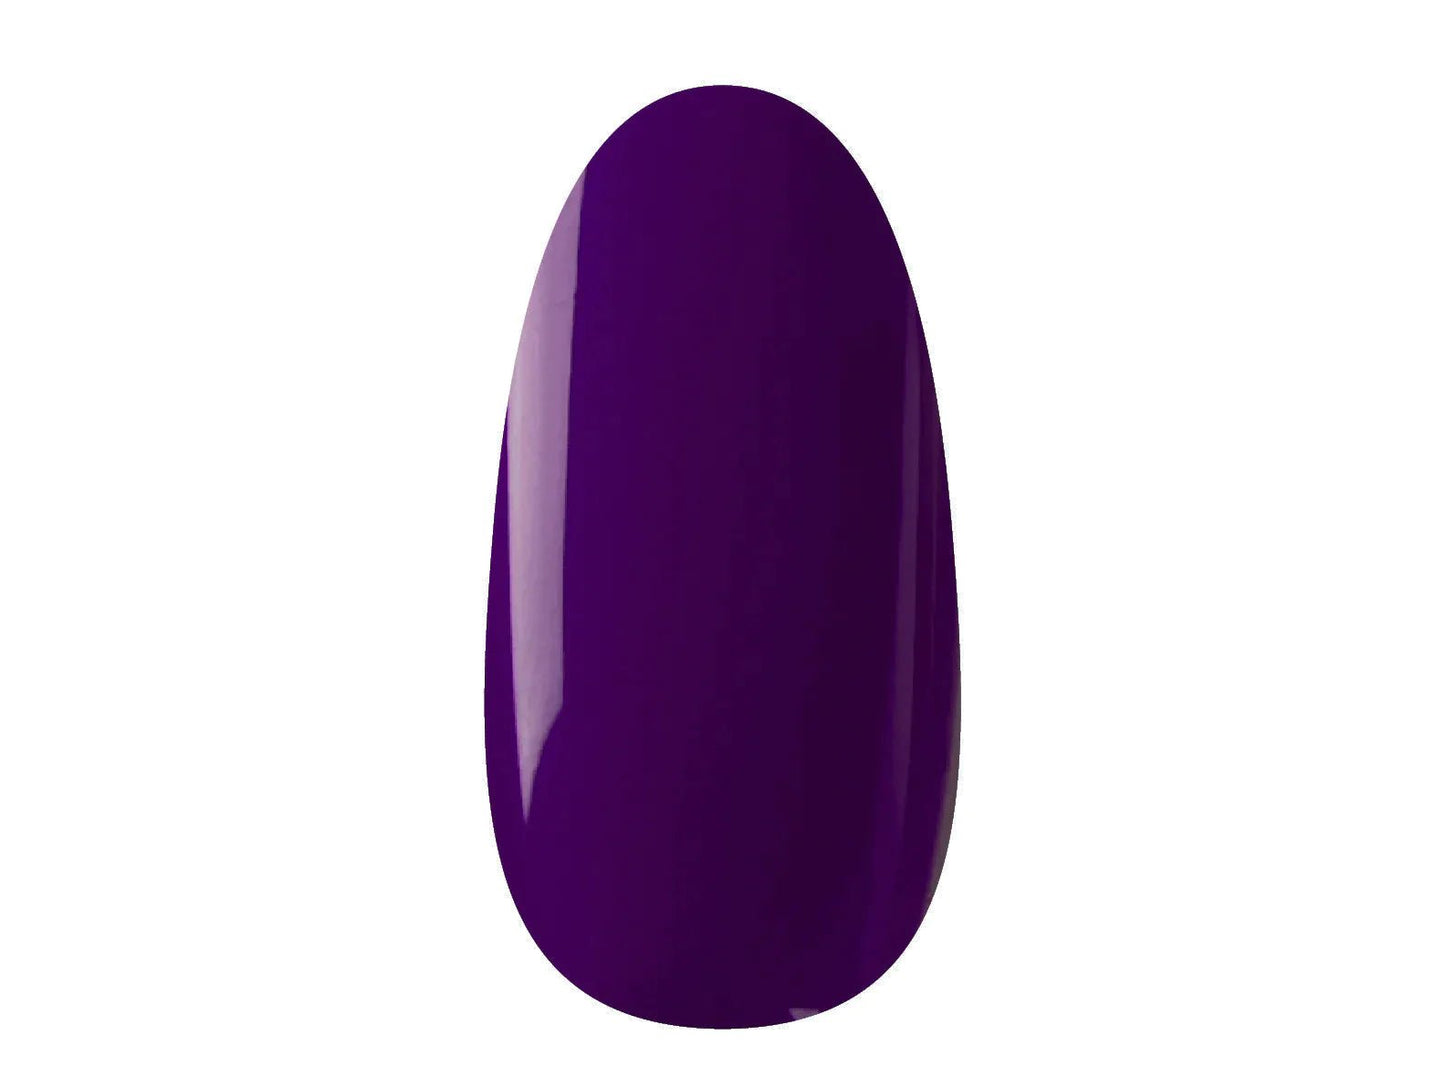 Pump Up the Jam - Gel Polish - 14 Day Manicure - Nail Tip 